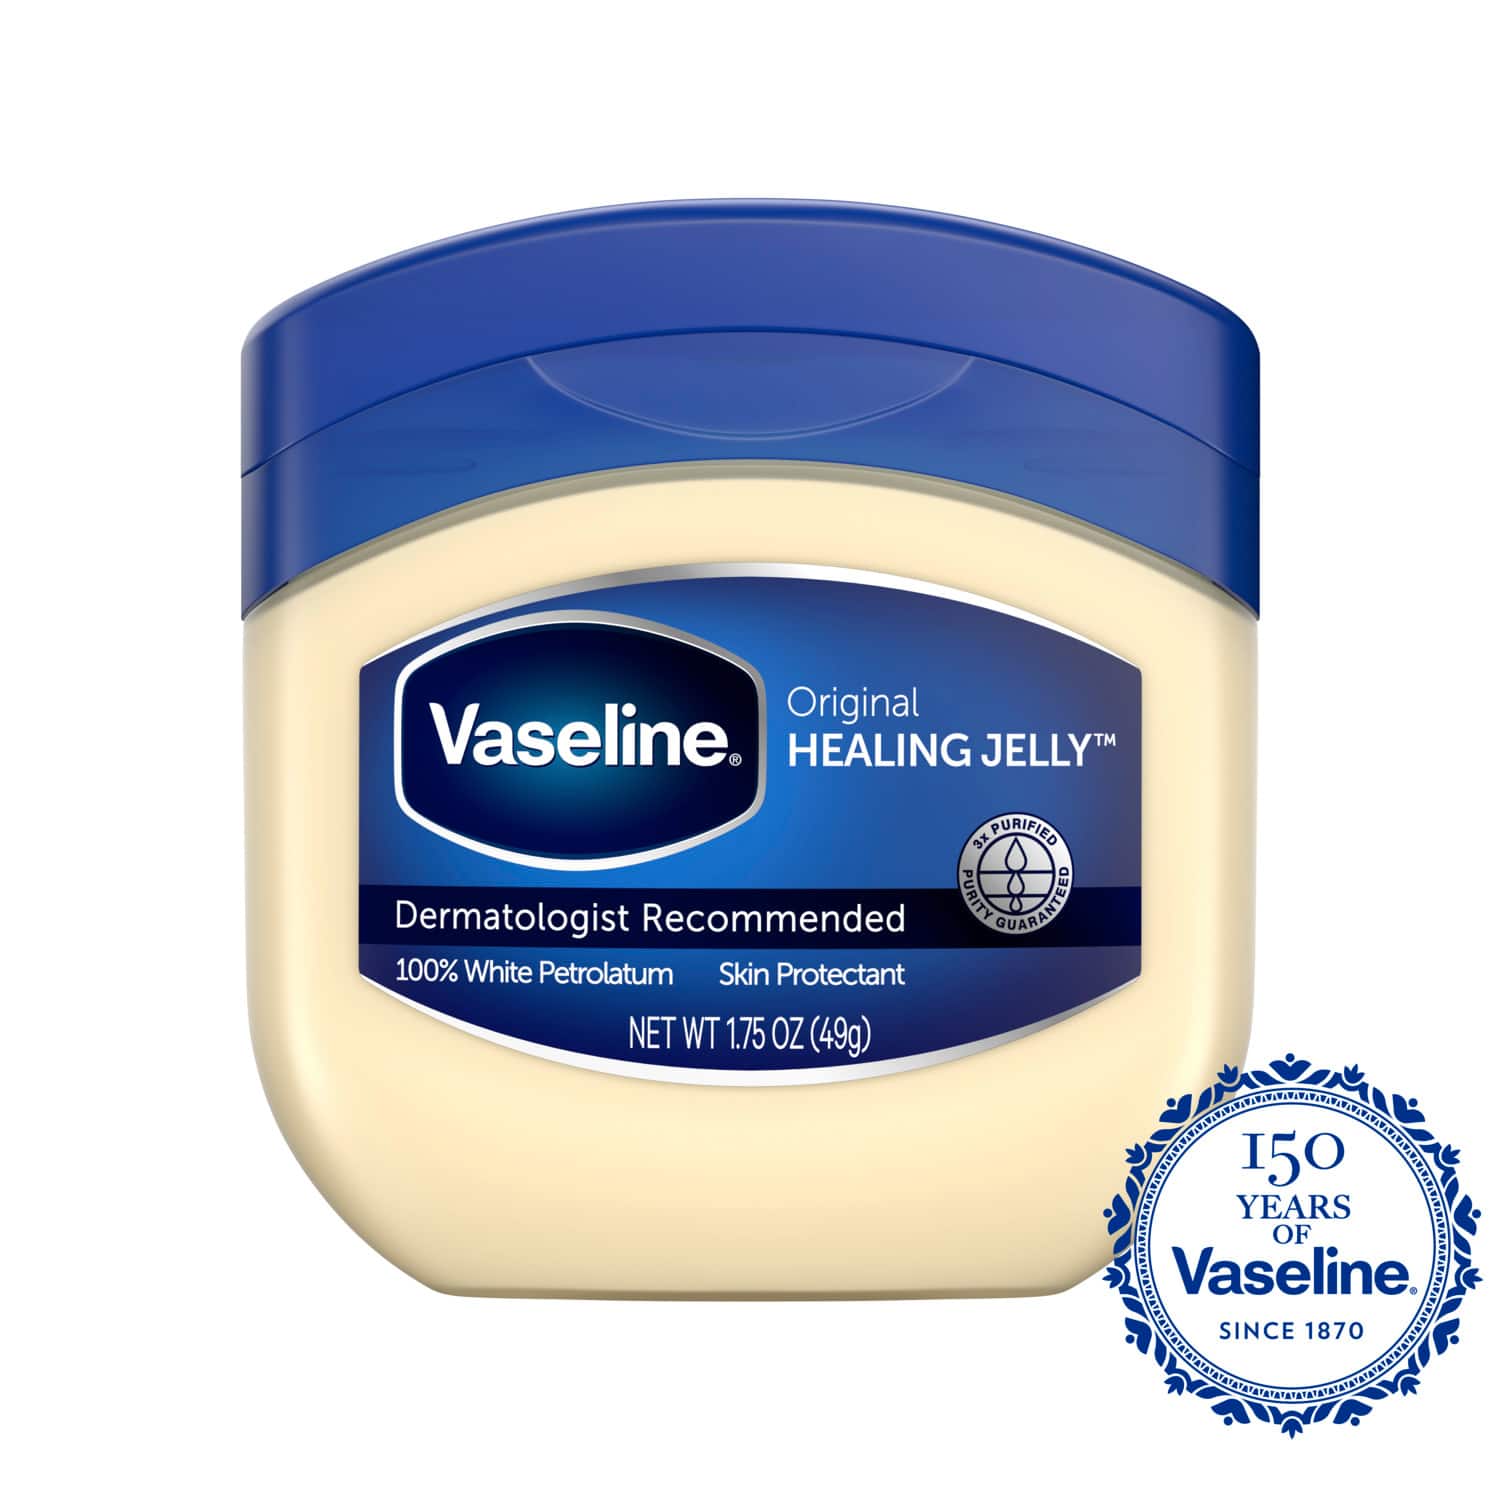 Lose belly fat overnight with vaseline